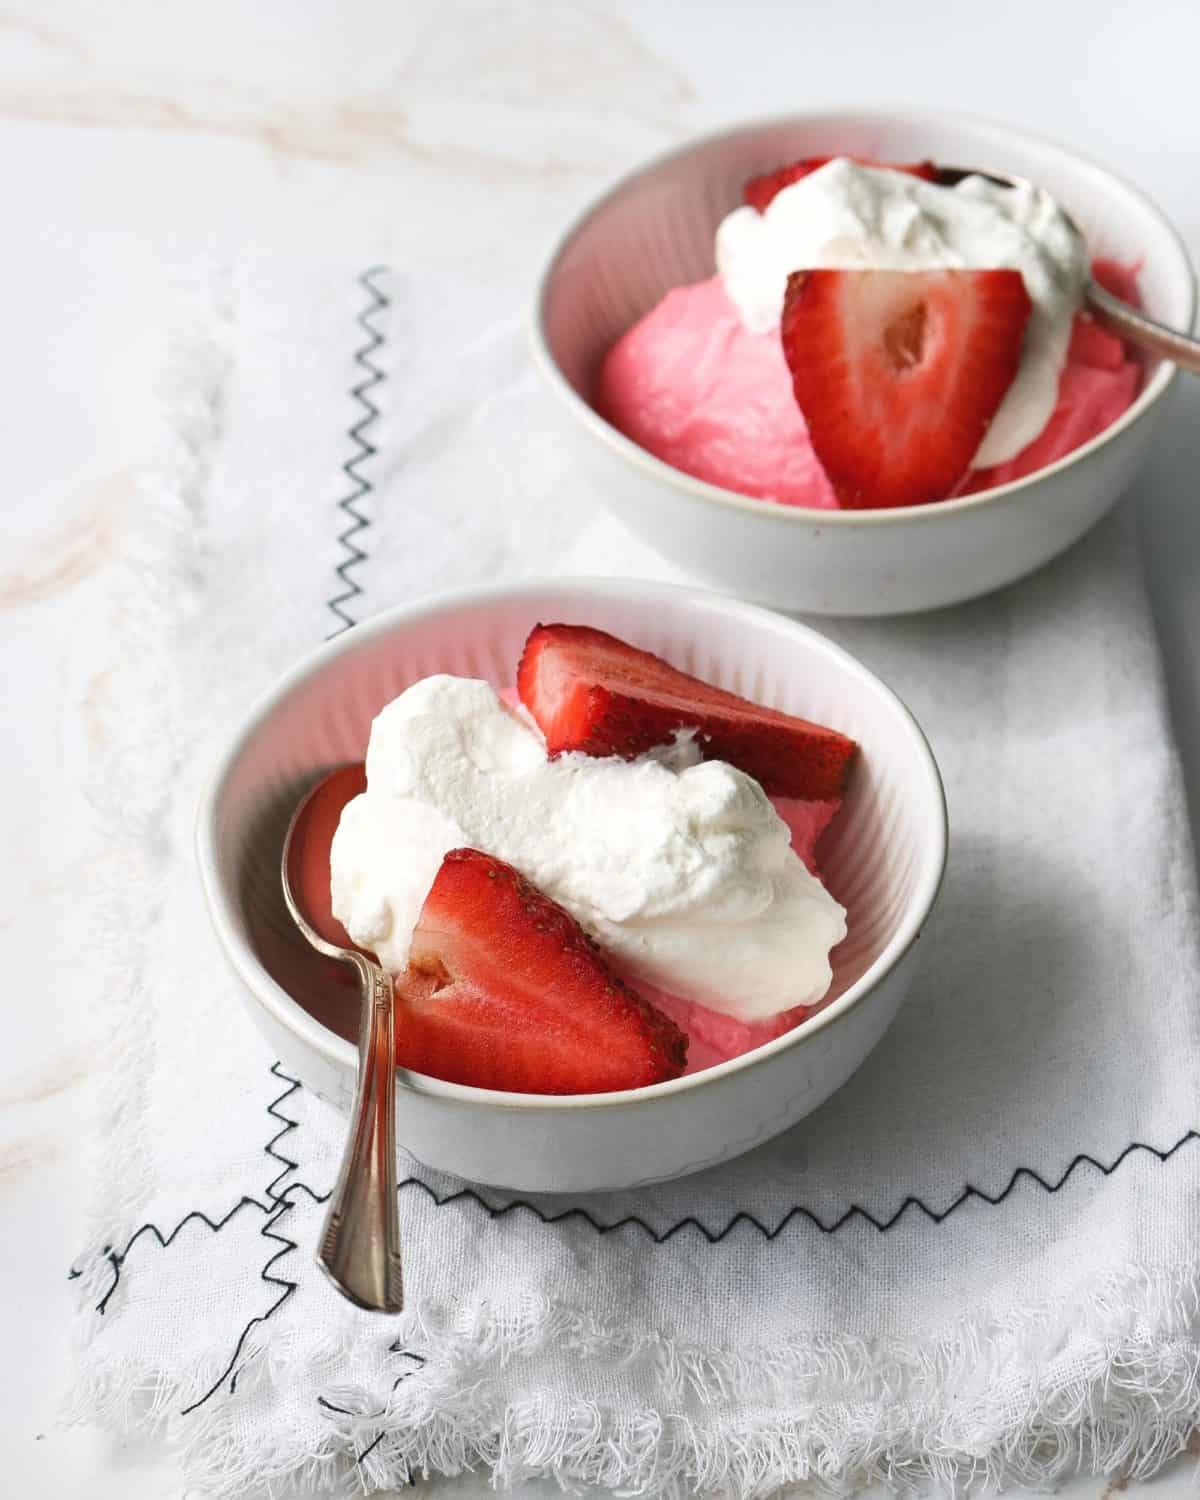 Two servings of pudding with fresh strawberries.